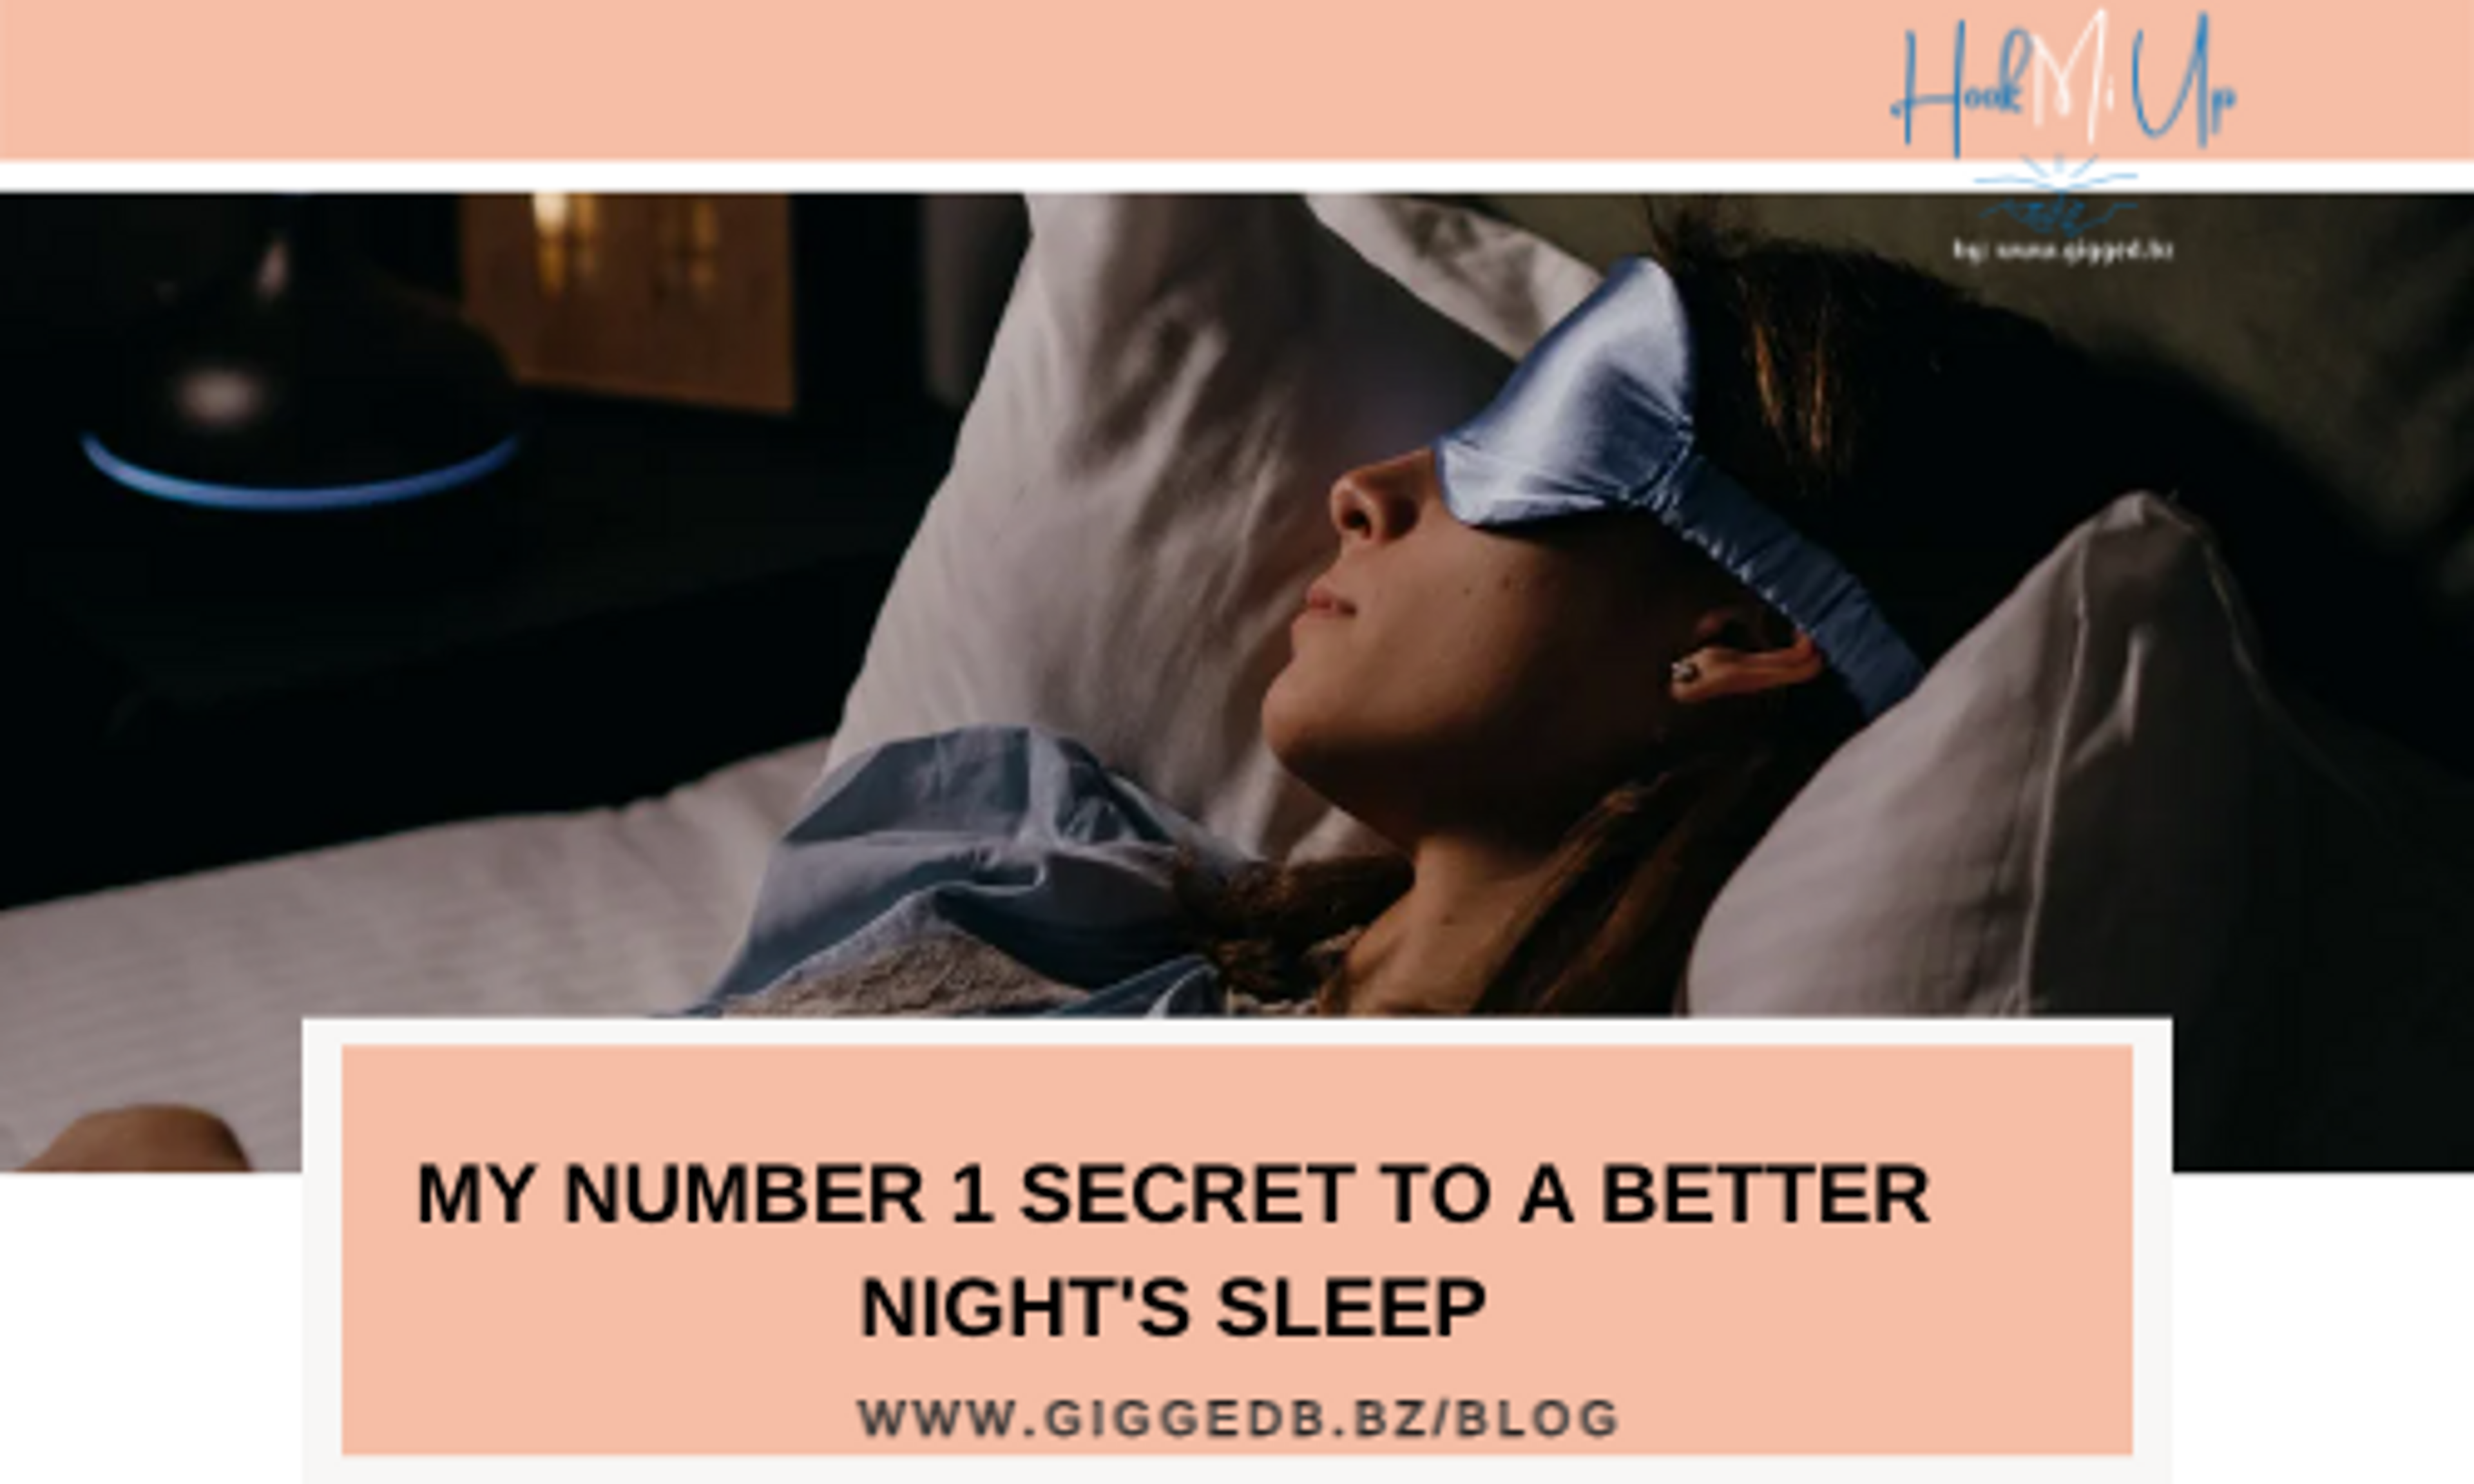 my number 1 secret to a better night's sleep